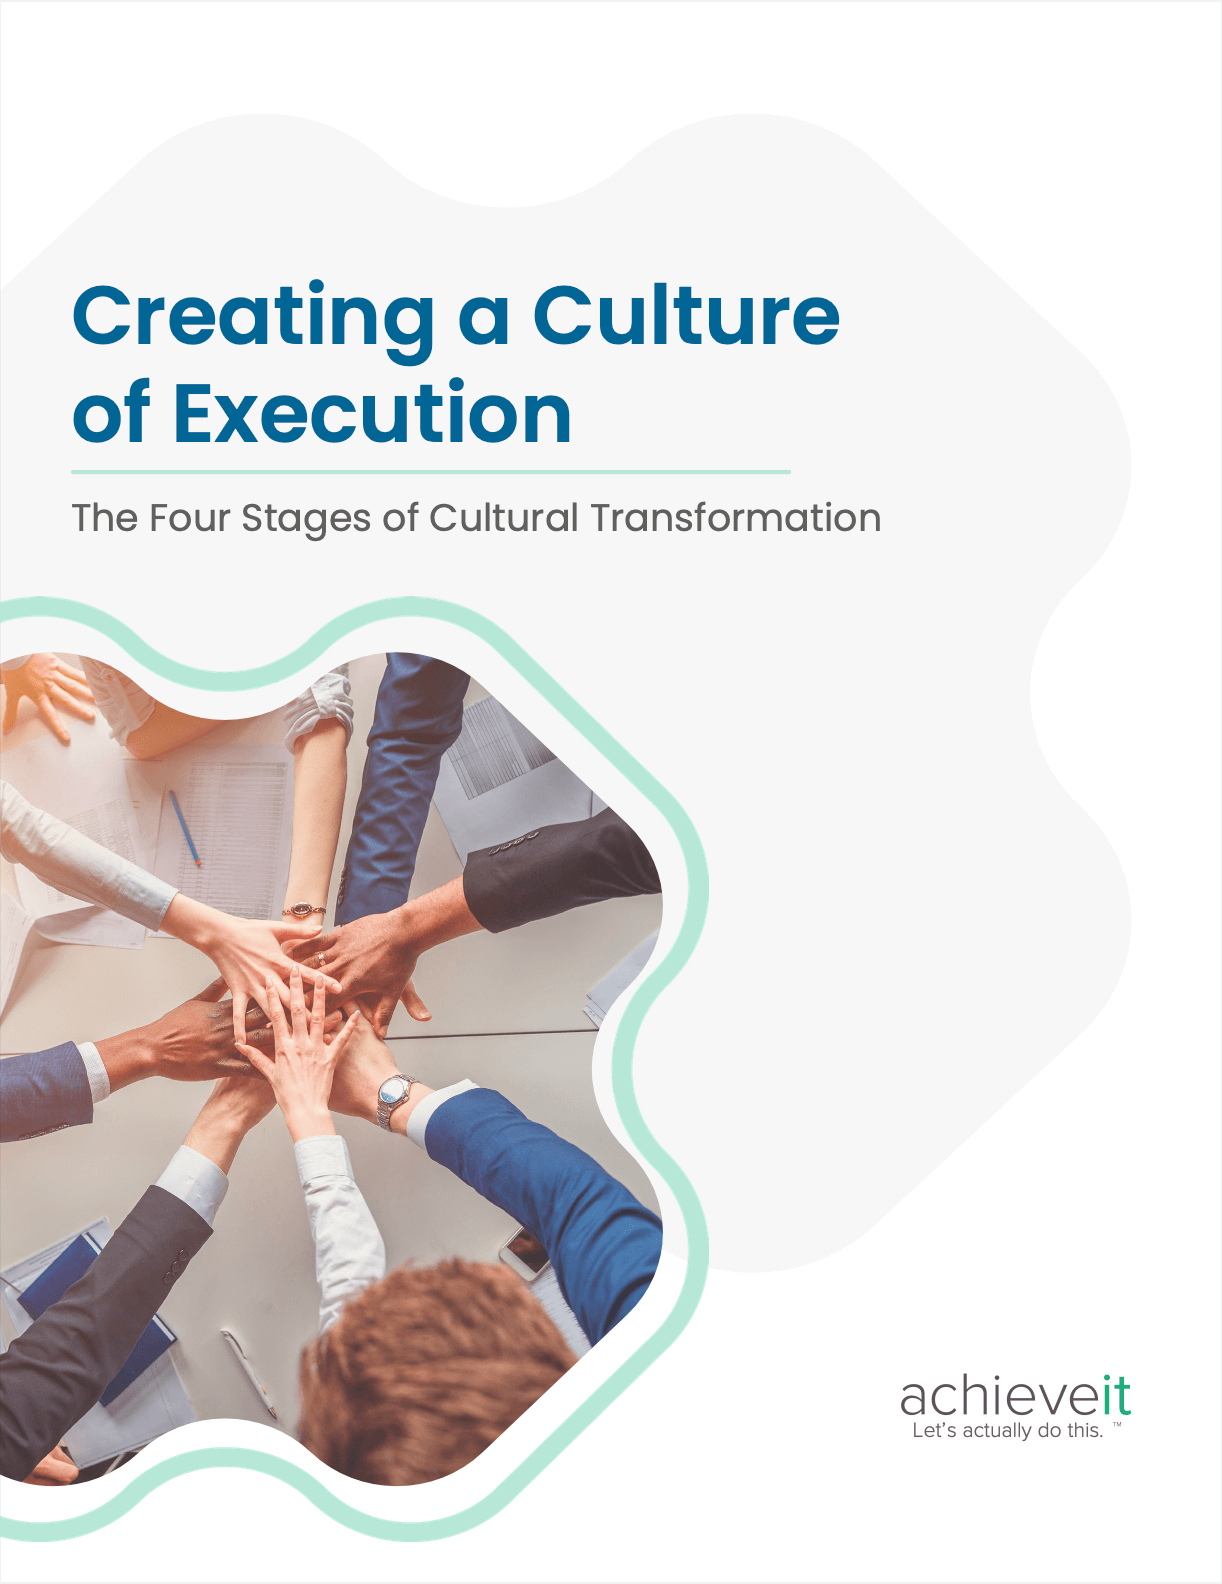 Four Stages to Creating a Strategy Execution Culture Guide_achieveit